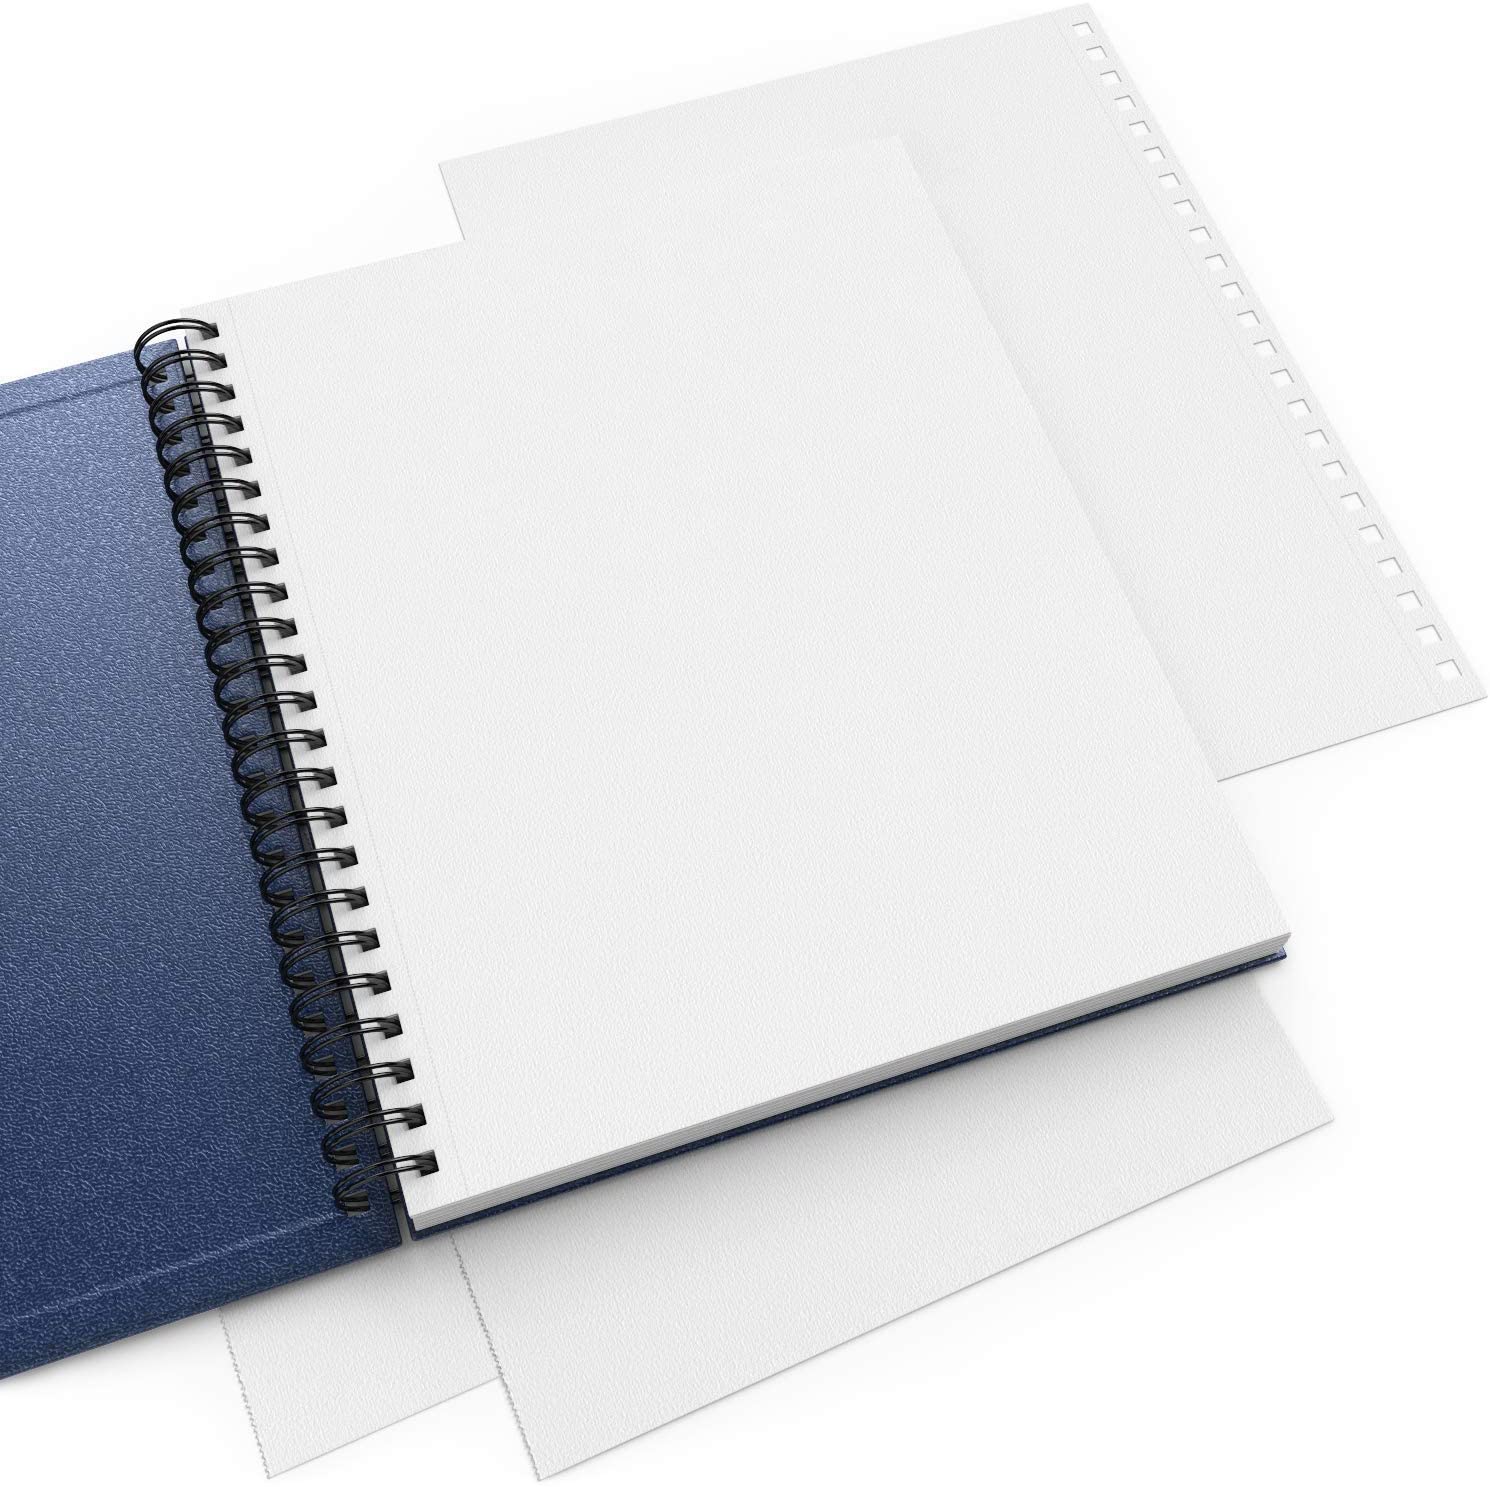 9 x 12 Linen-Bound Watercolor Paper Book, 76 Sheets, 110 lb - Cold-Pressed  - 2 Pack, 9” x 12” - 2 Pack - Kroger